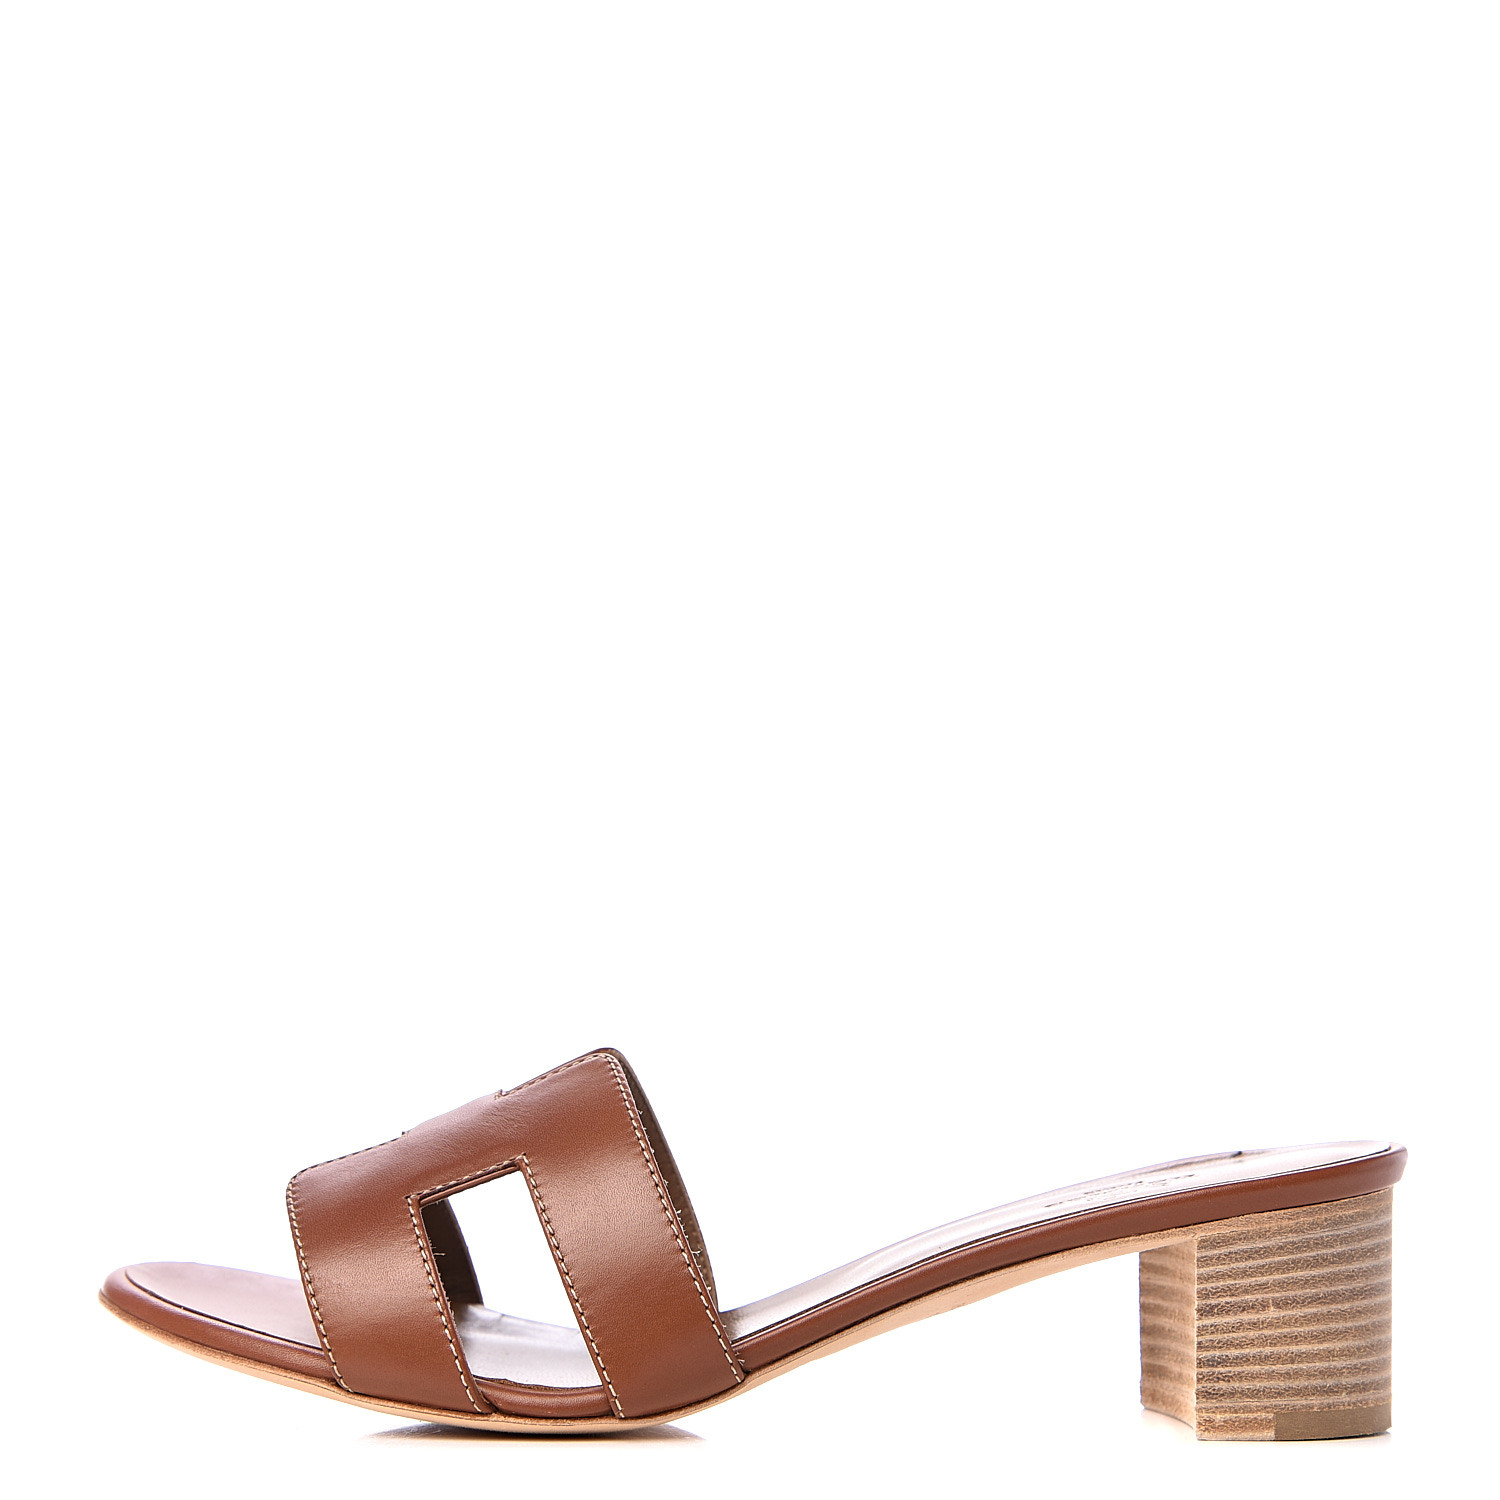 oasis gold sandals